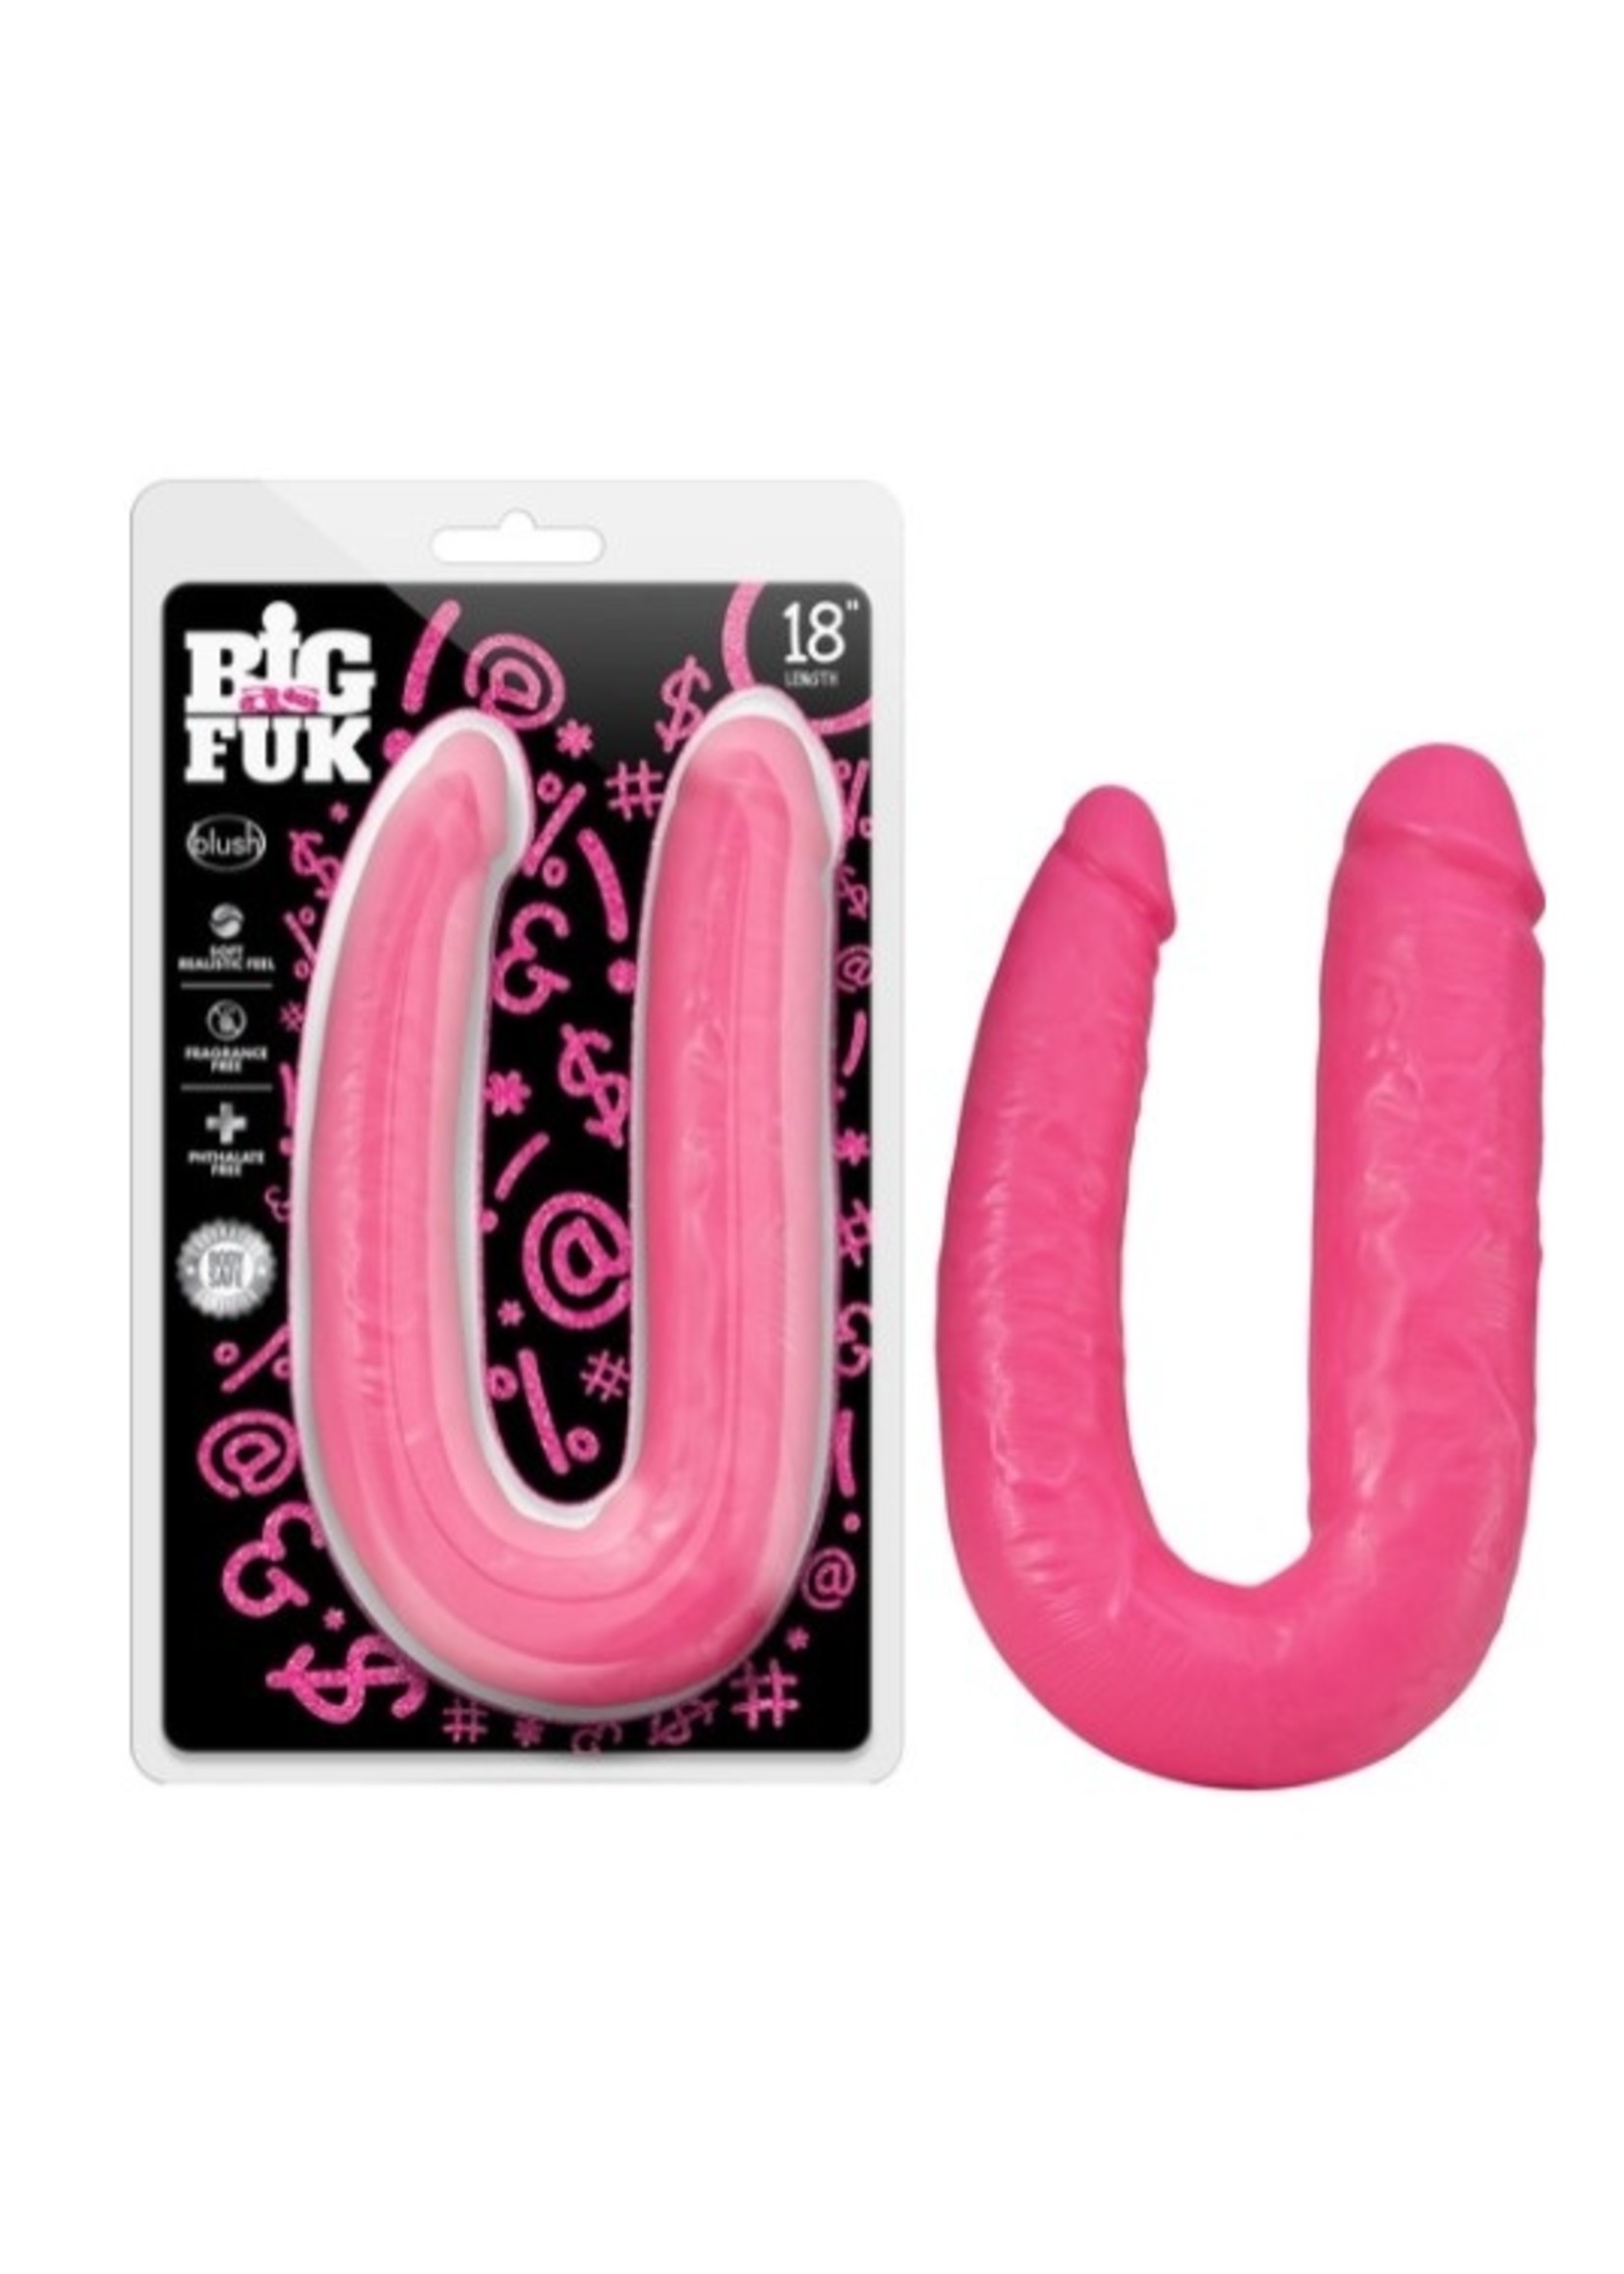 Big As Fuk Double Headed Dildo with Suction Cup 18in in Pink